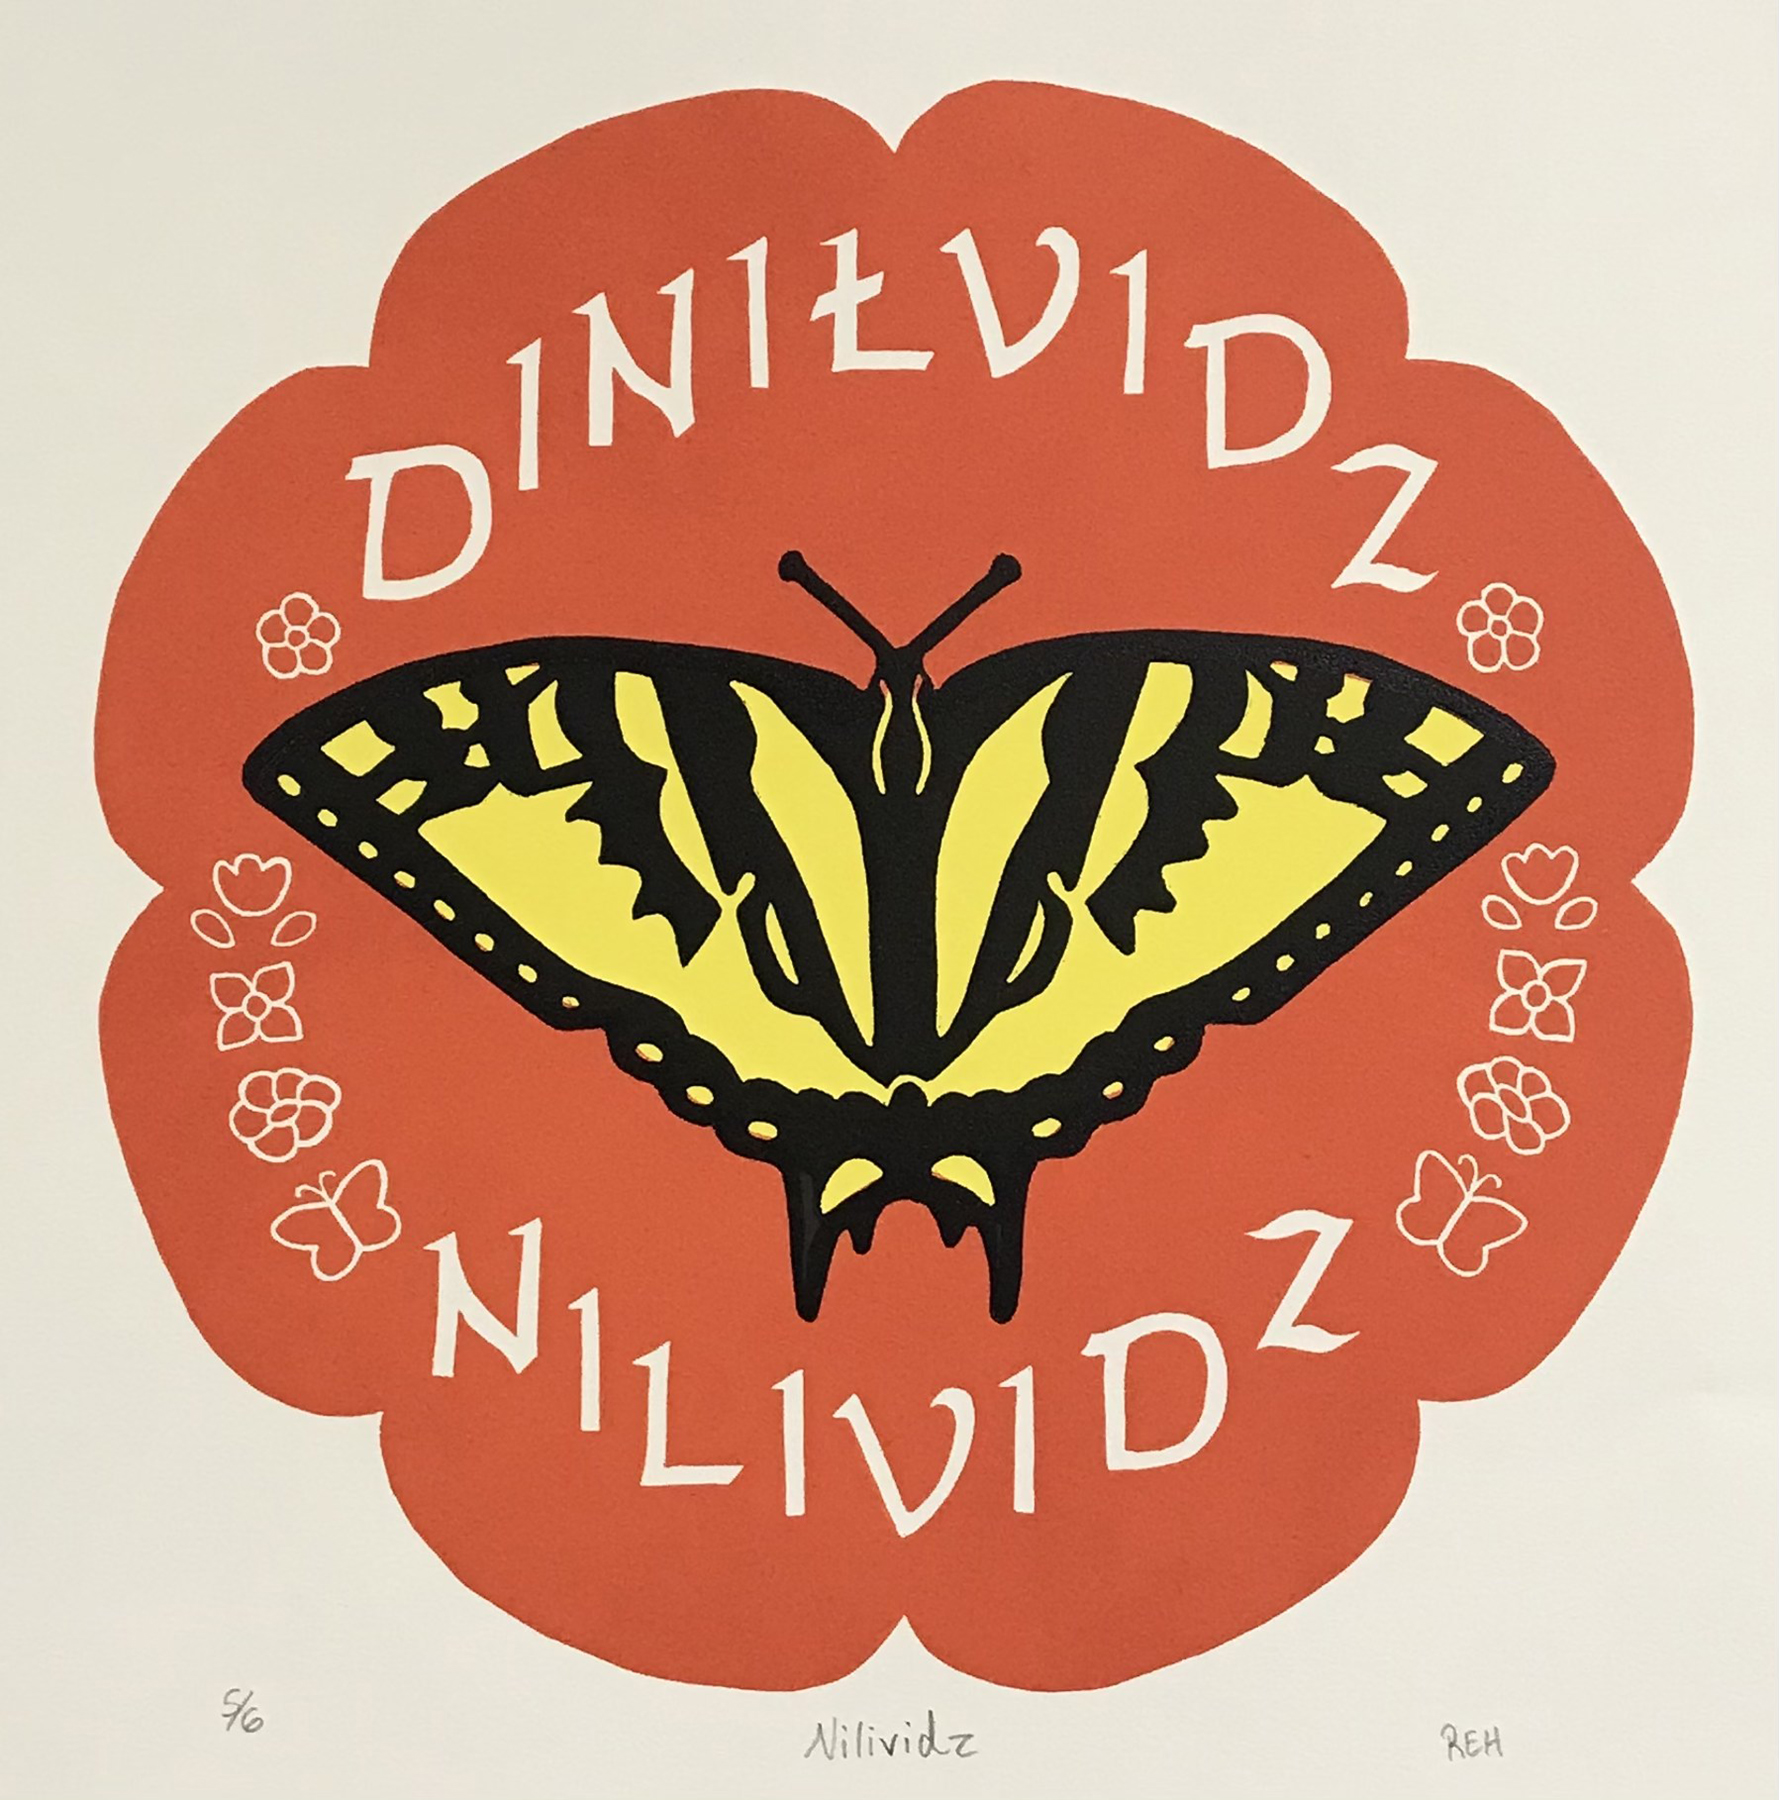 orange flower shaped crest with a yellow and black butterfly, courtesy of the artist